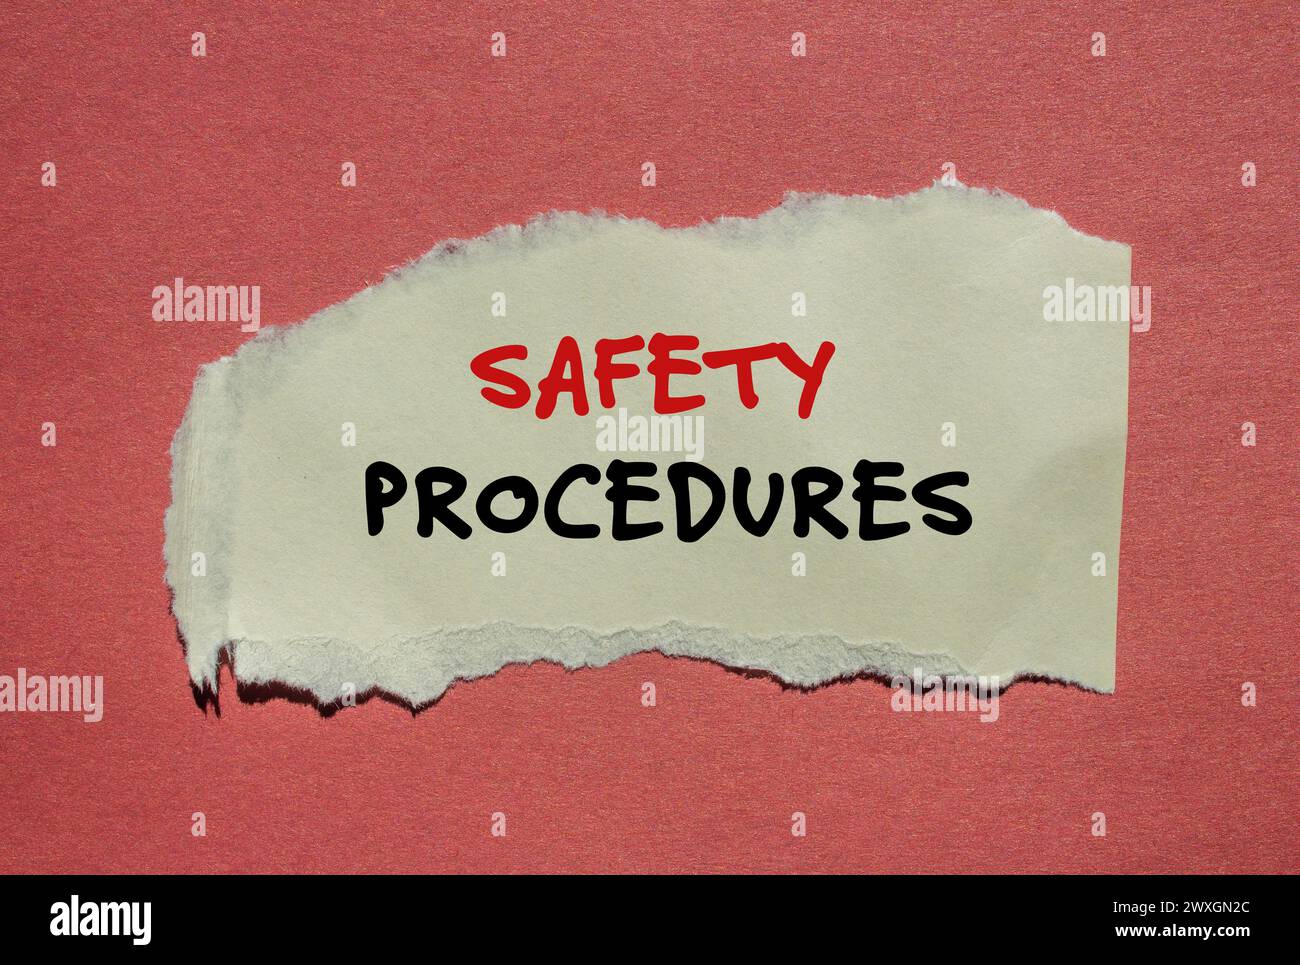 Safety procedures words written on torn paper piece with red background. Conceptual symbol. Copy space. Stock Photo